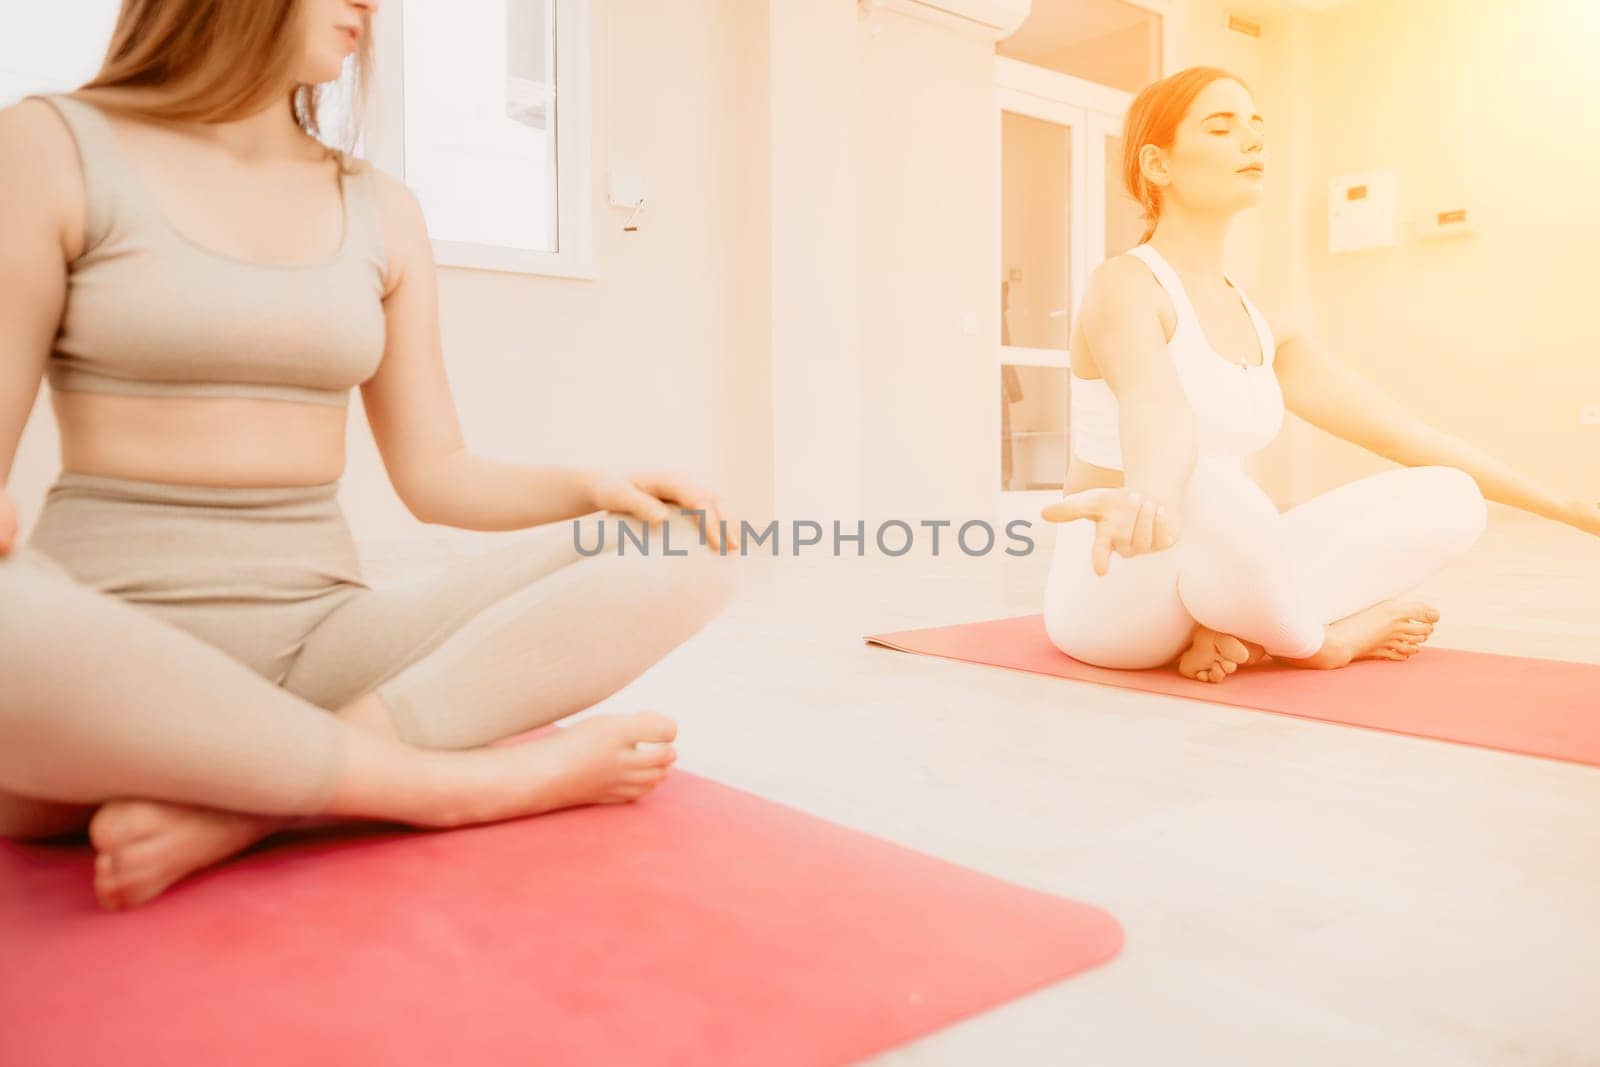 Group of young womans fitness instructor in Sportswear Leggings and Tops, stretching in the gym before pilates, on a yoga mat near the large window on a sunny day, female fitness yoga routine concept.